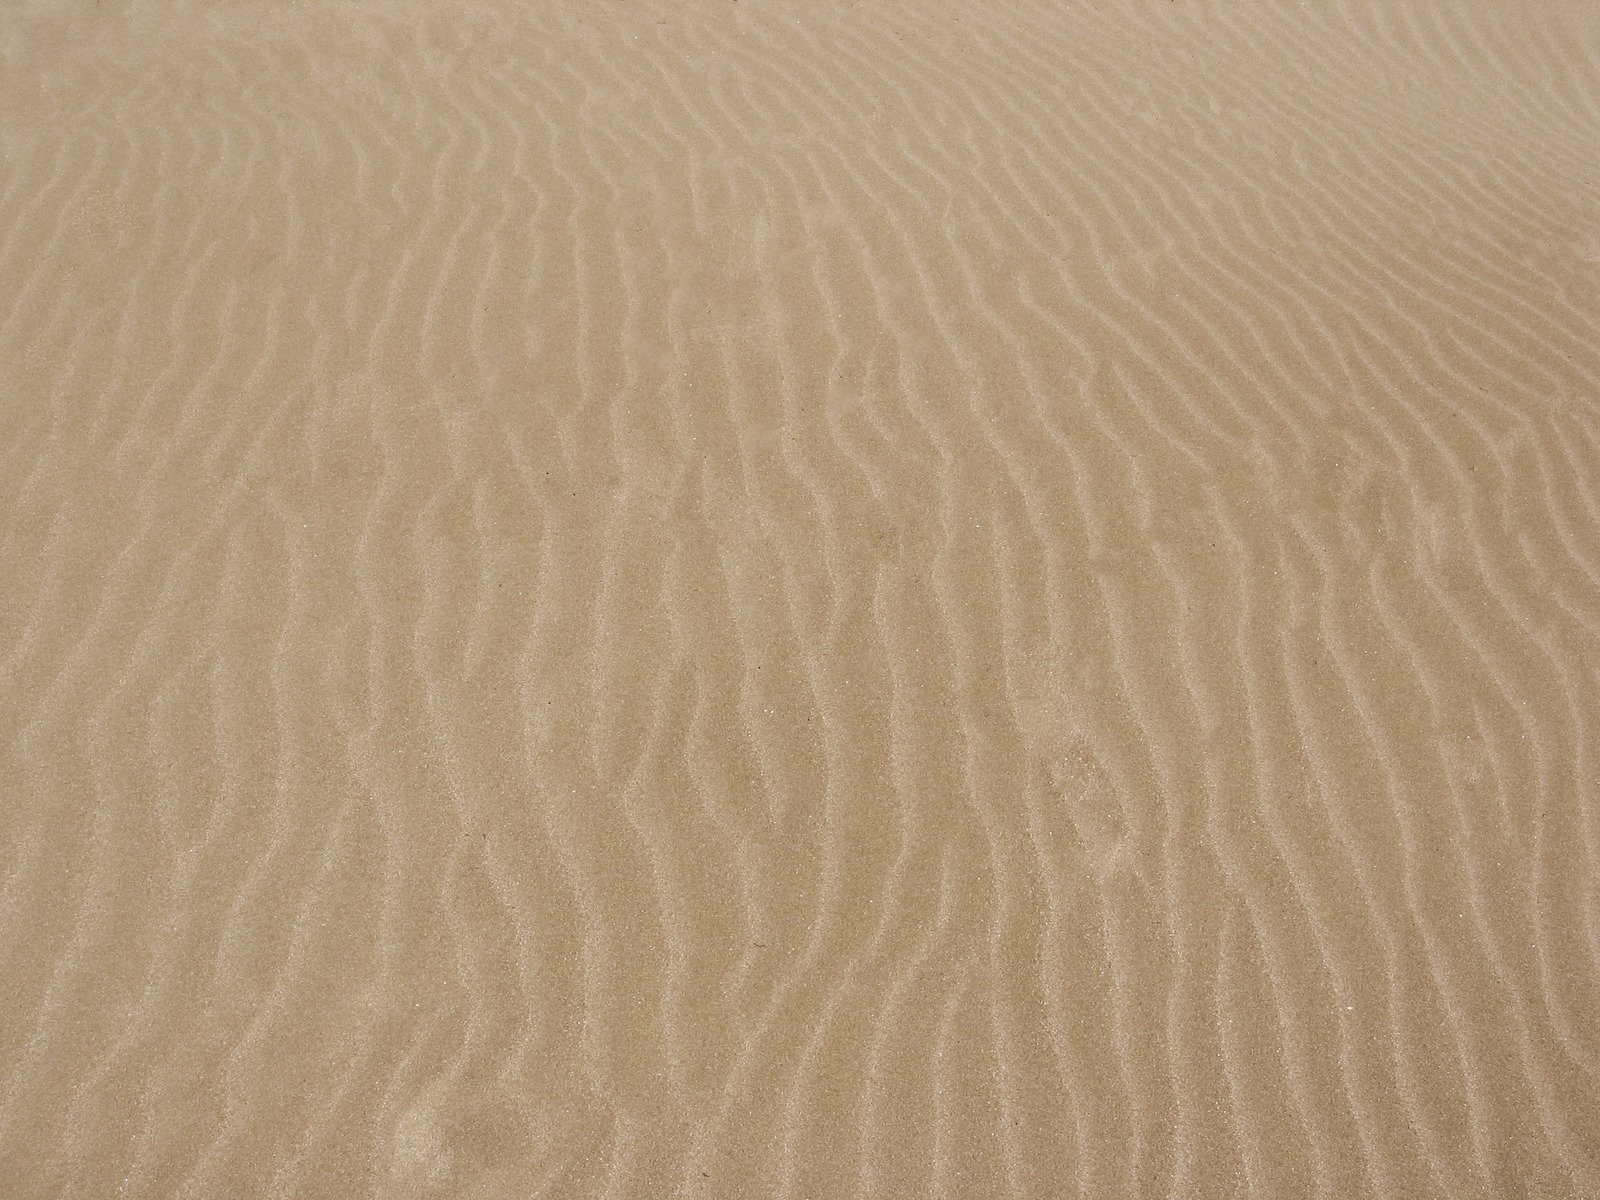 a sand dune pattern in the middle of a plain area